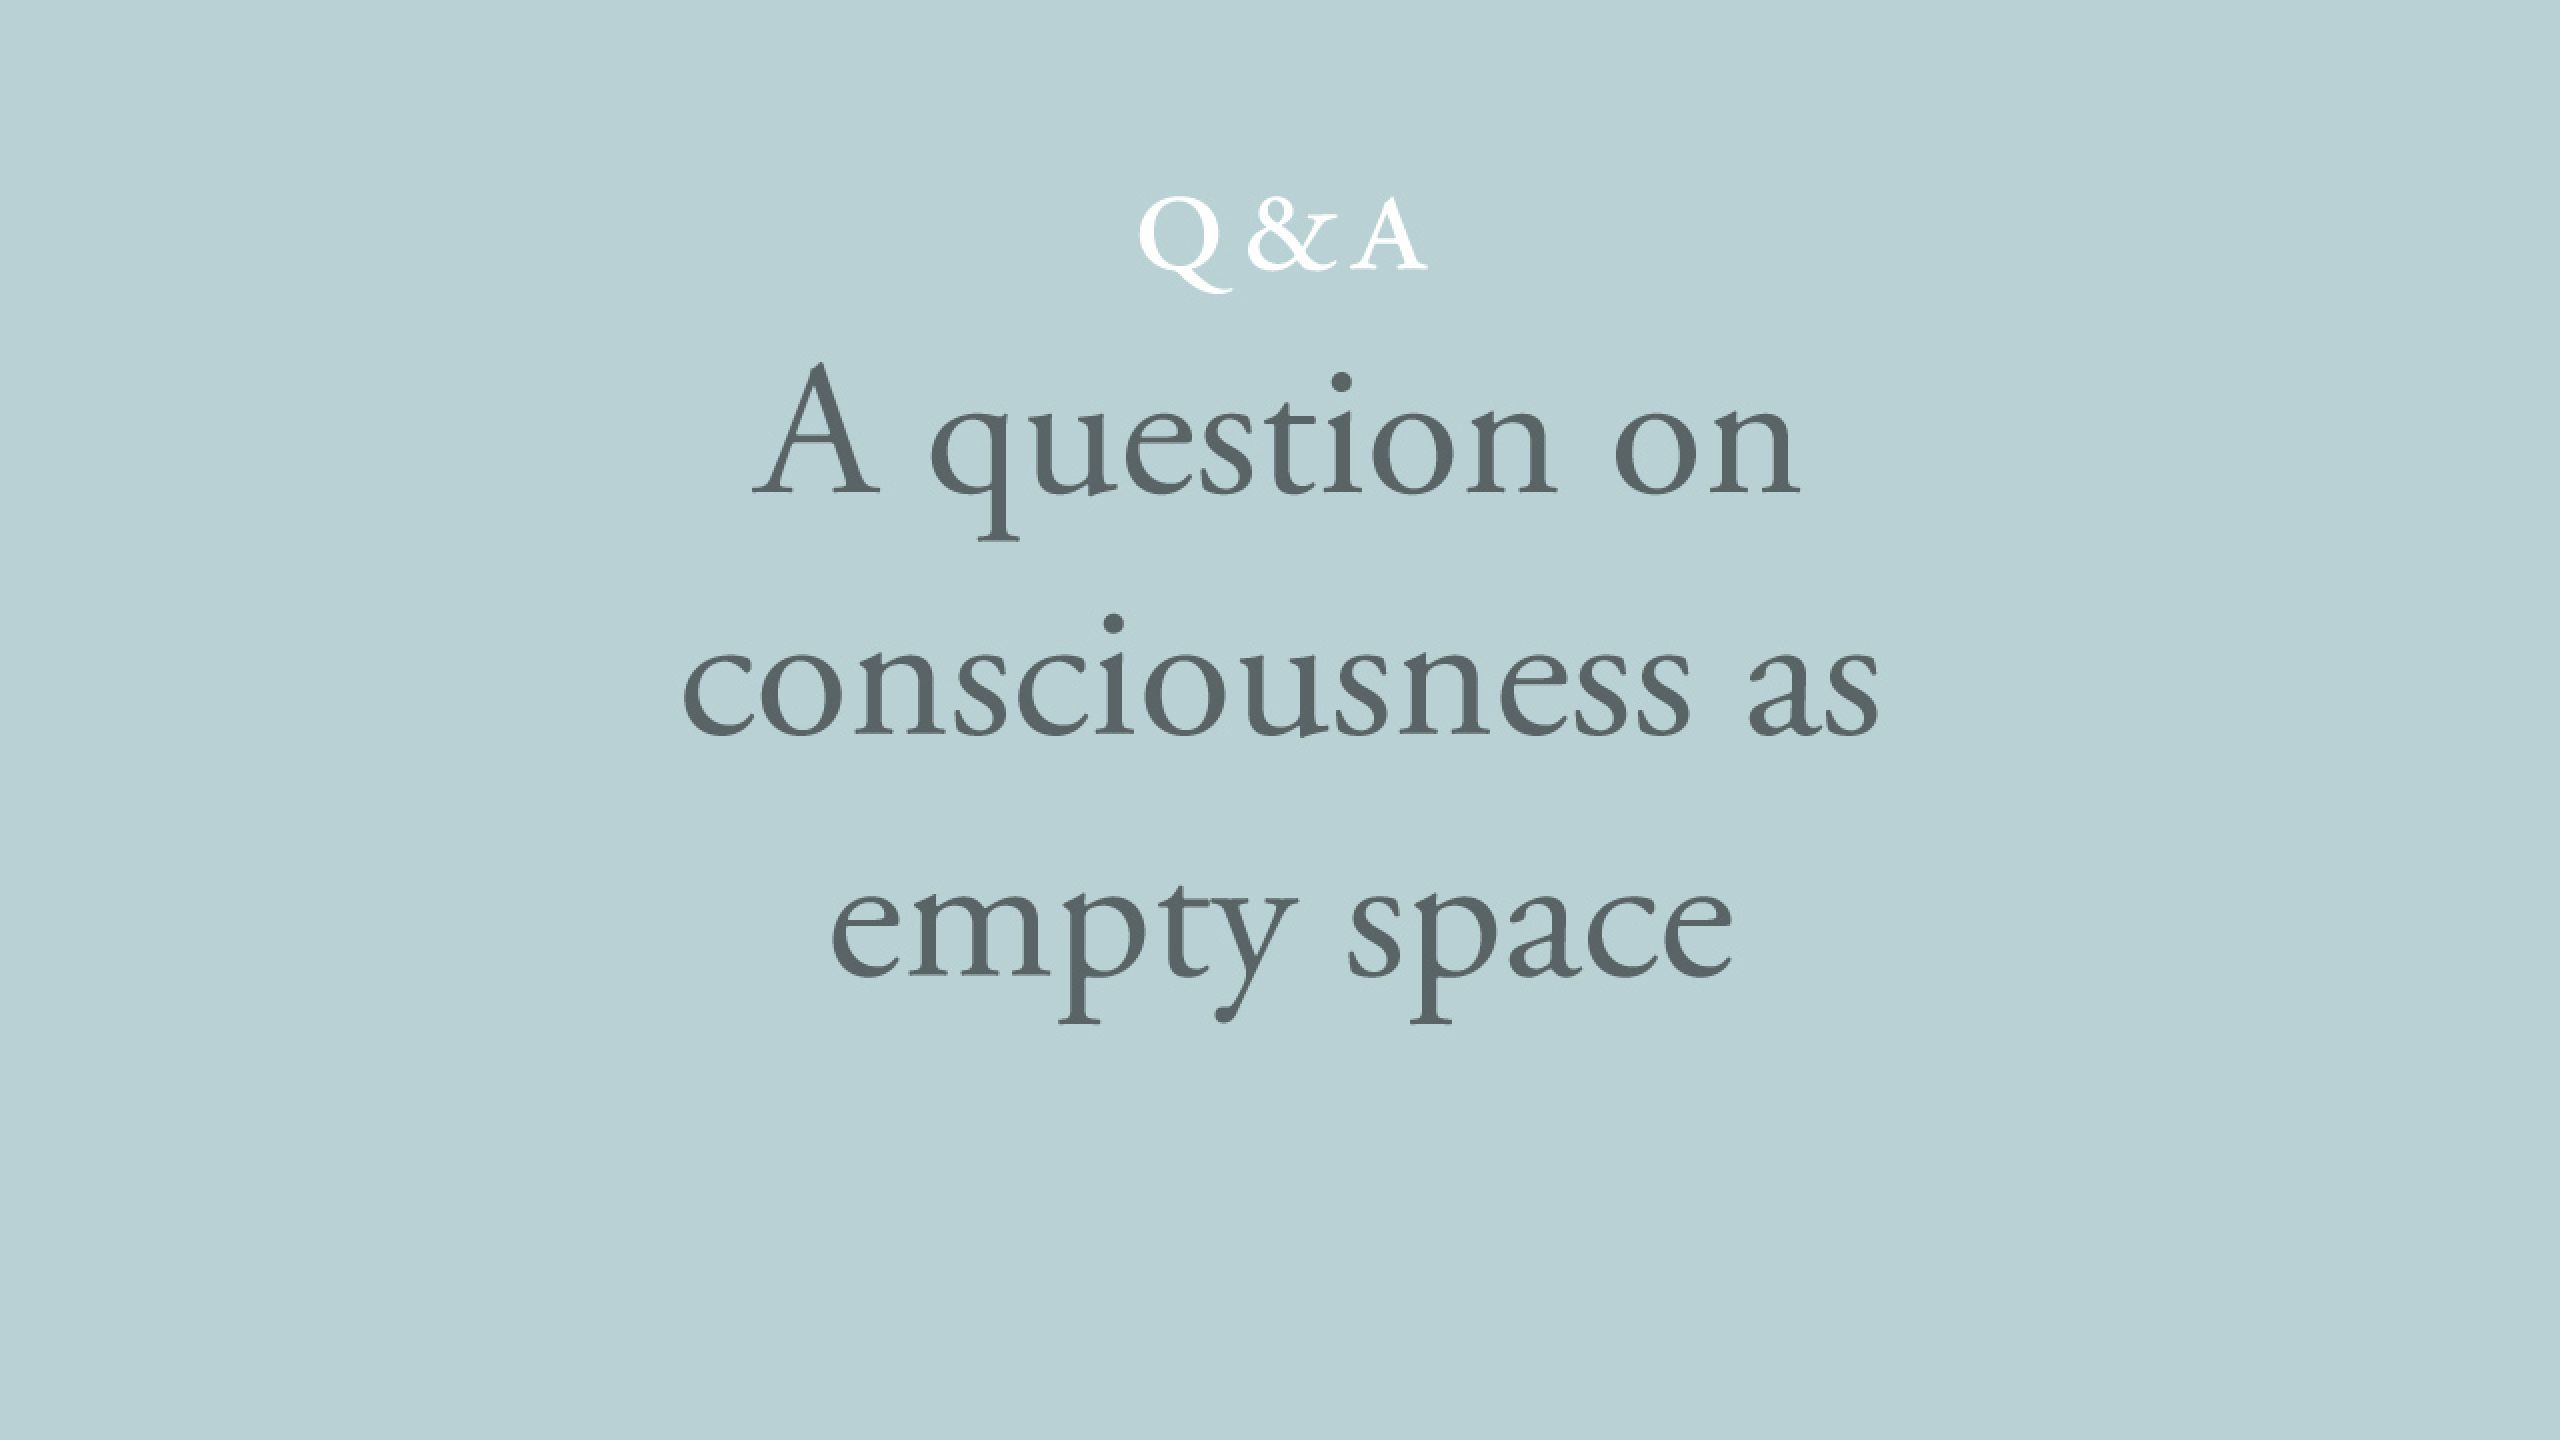 Attending to consciousness as empty space